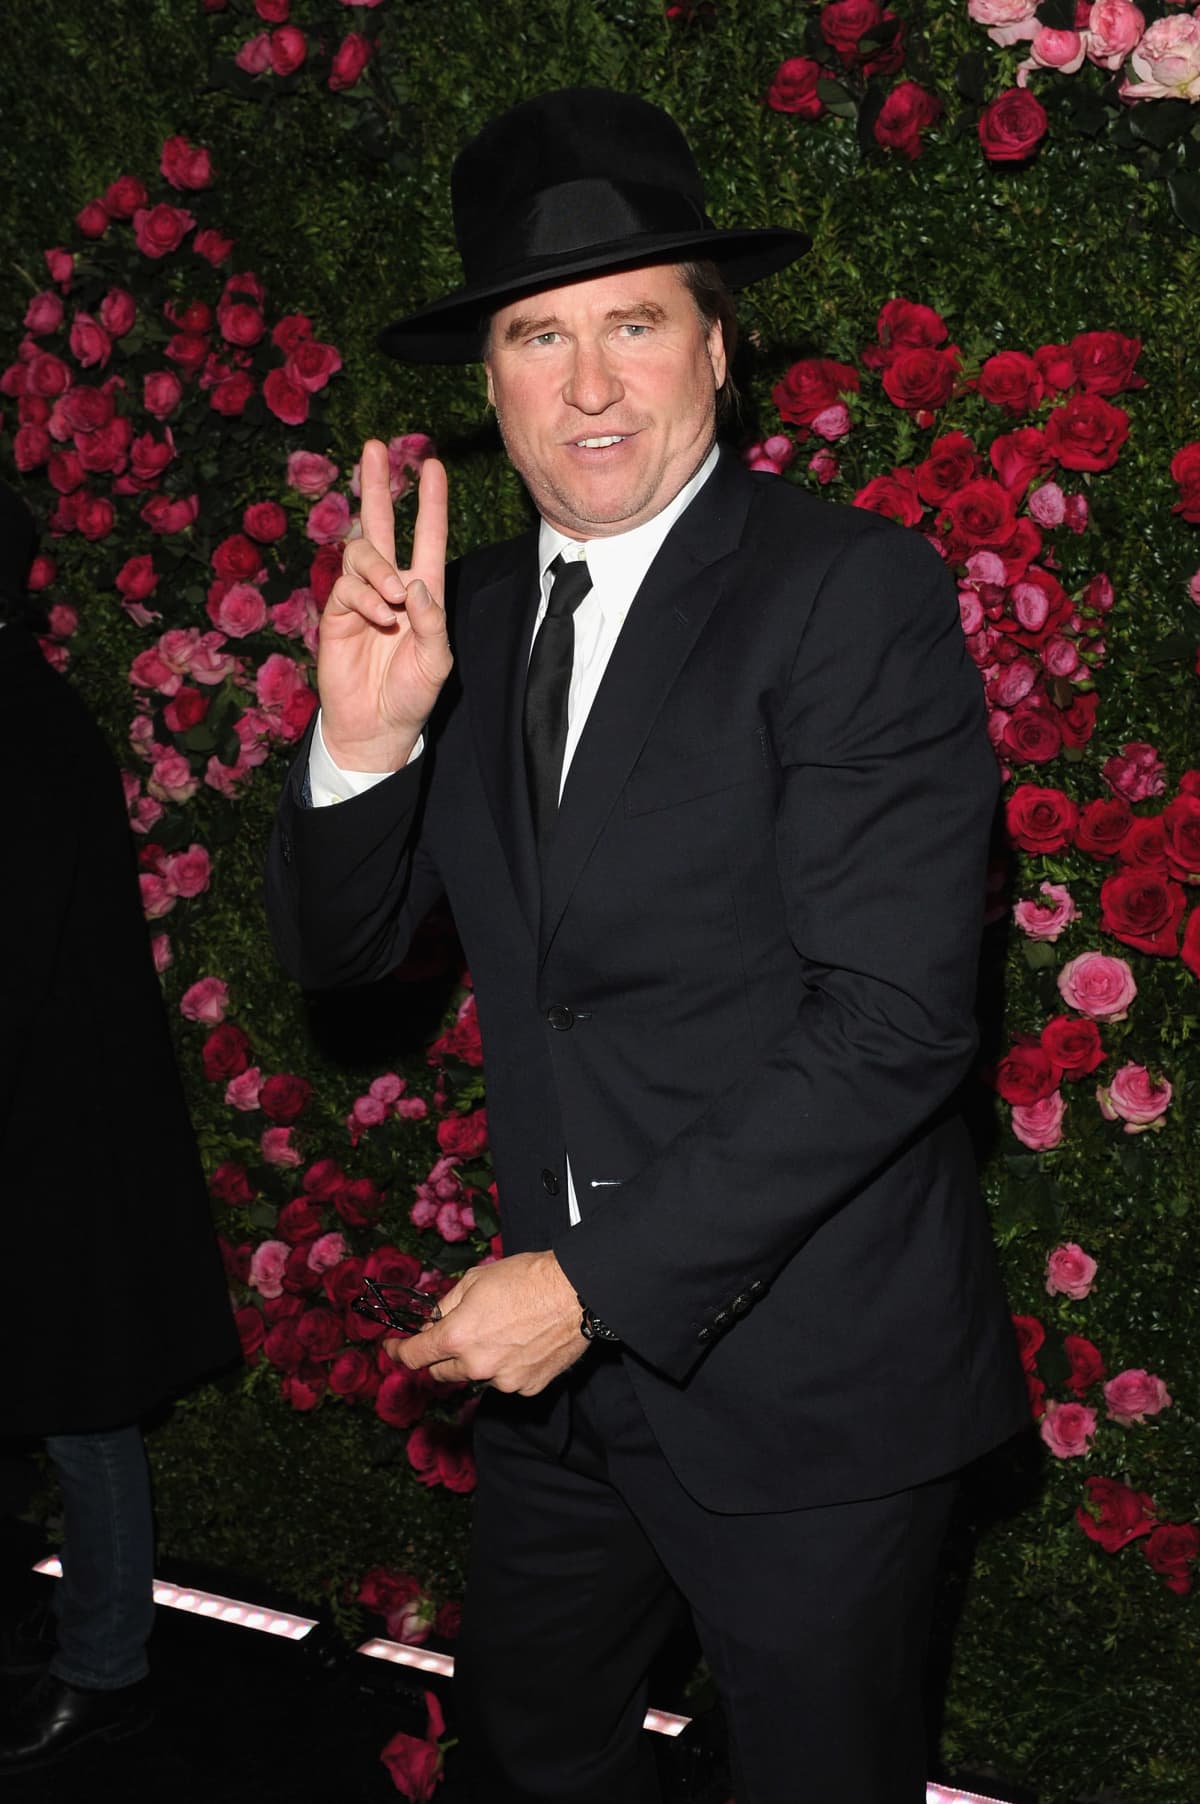 Val Kilmer during Mercedes-Benz Spring 2006 L.A. Fashion Week - Davis Factor, Dean Factor, Paul DeArmas and Michael Baruch Kick Off Dinner at Mr. Chow Restaurant in Beverly Hills, California, United States. (Photo by Donato Sardella/WireImage)